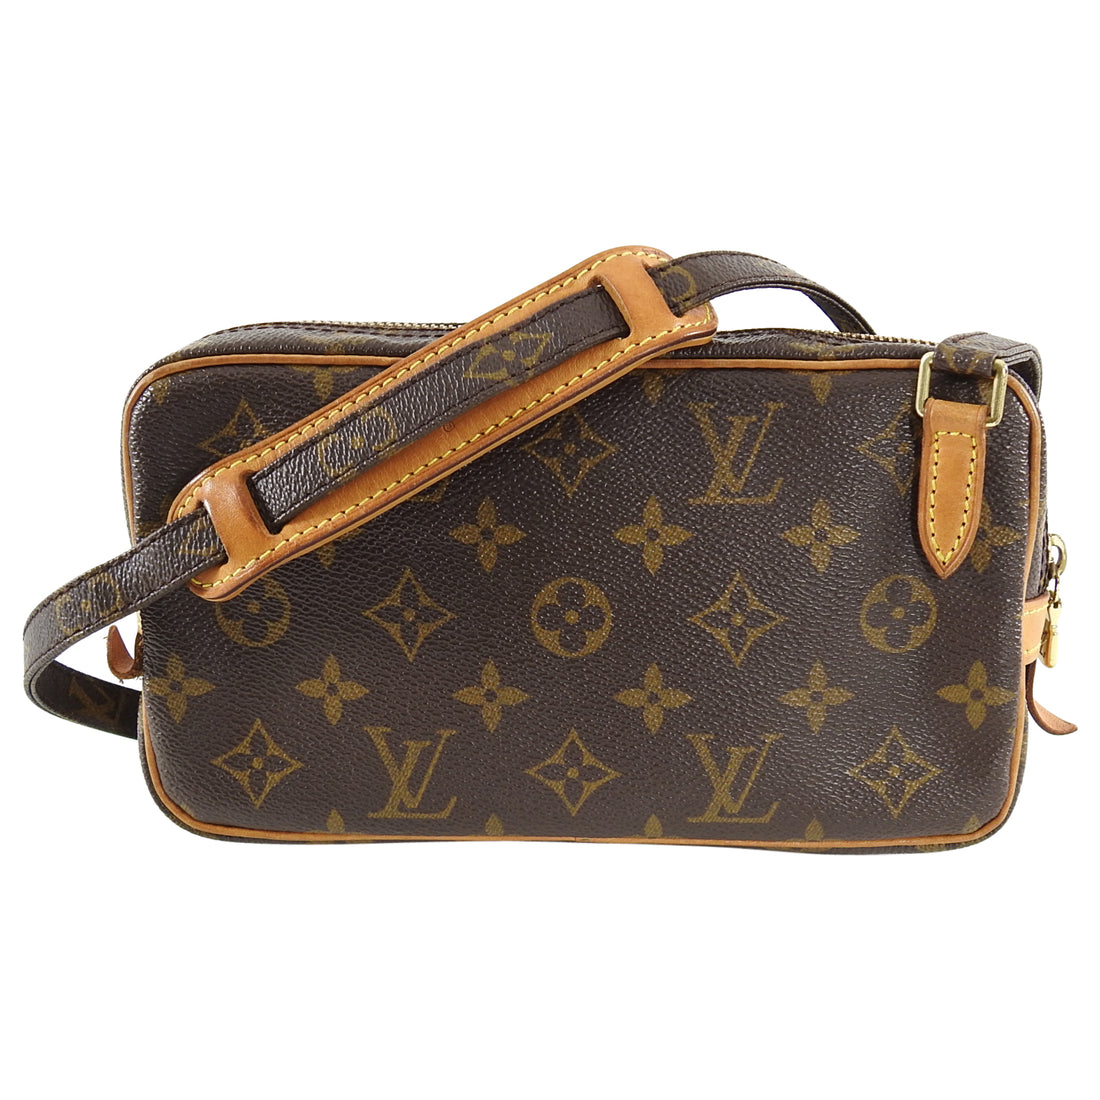 Louis Vuitton 2001 Marly Bandouliere Monogram Crossbody Bag – I MISS YOU VINTAGE